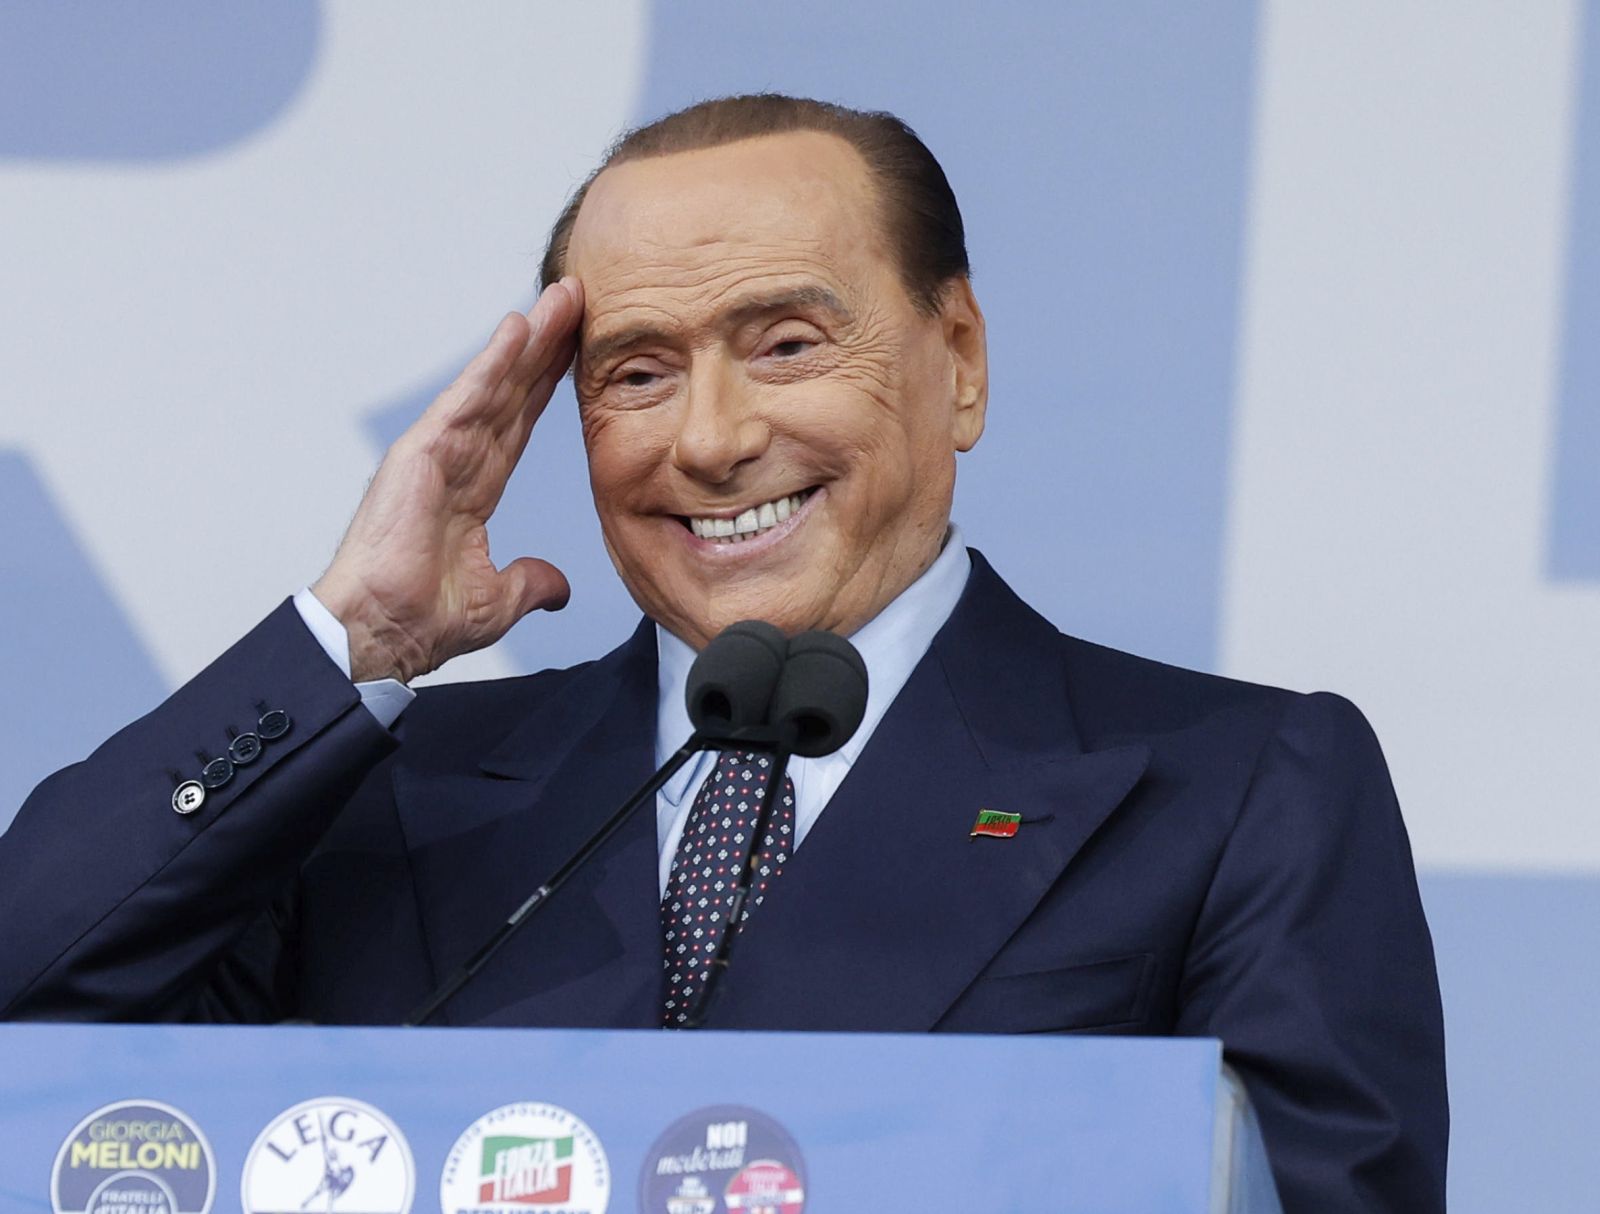 epa10199840 President of Italian party 'Forza Italia', Silvio Berlusconi attends the center-right closing rally of the campaign for the general elections at Piazza del Popolo, in Rome, Italy, 22 September 2022. Italy will hold its general snap elections on 25 September 2022 to elect a new Prime Minister.  EPA/GIUSEPPE LAMI